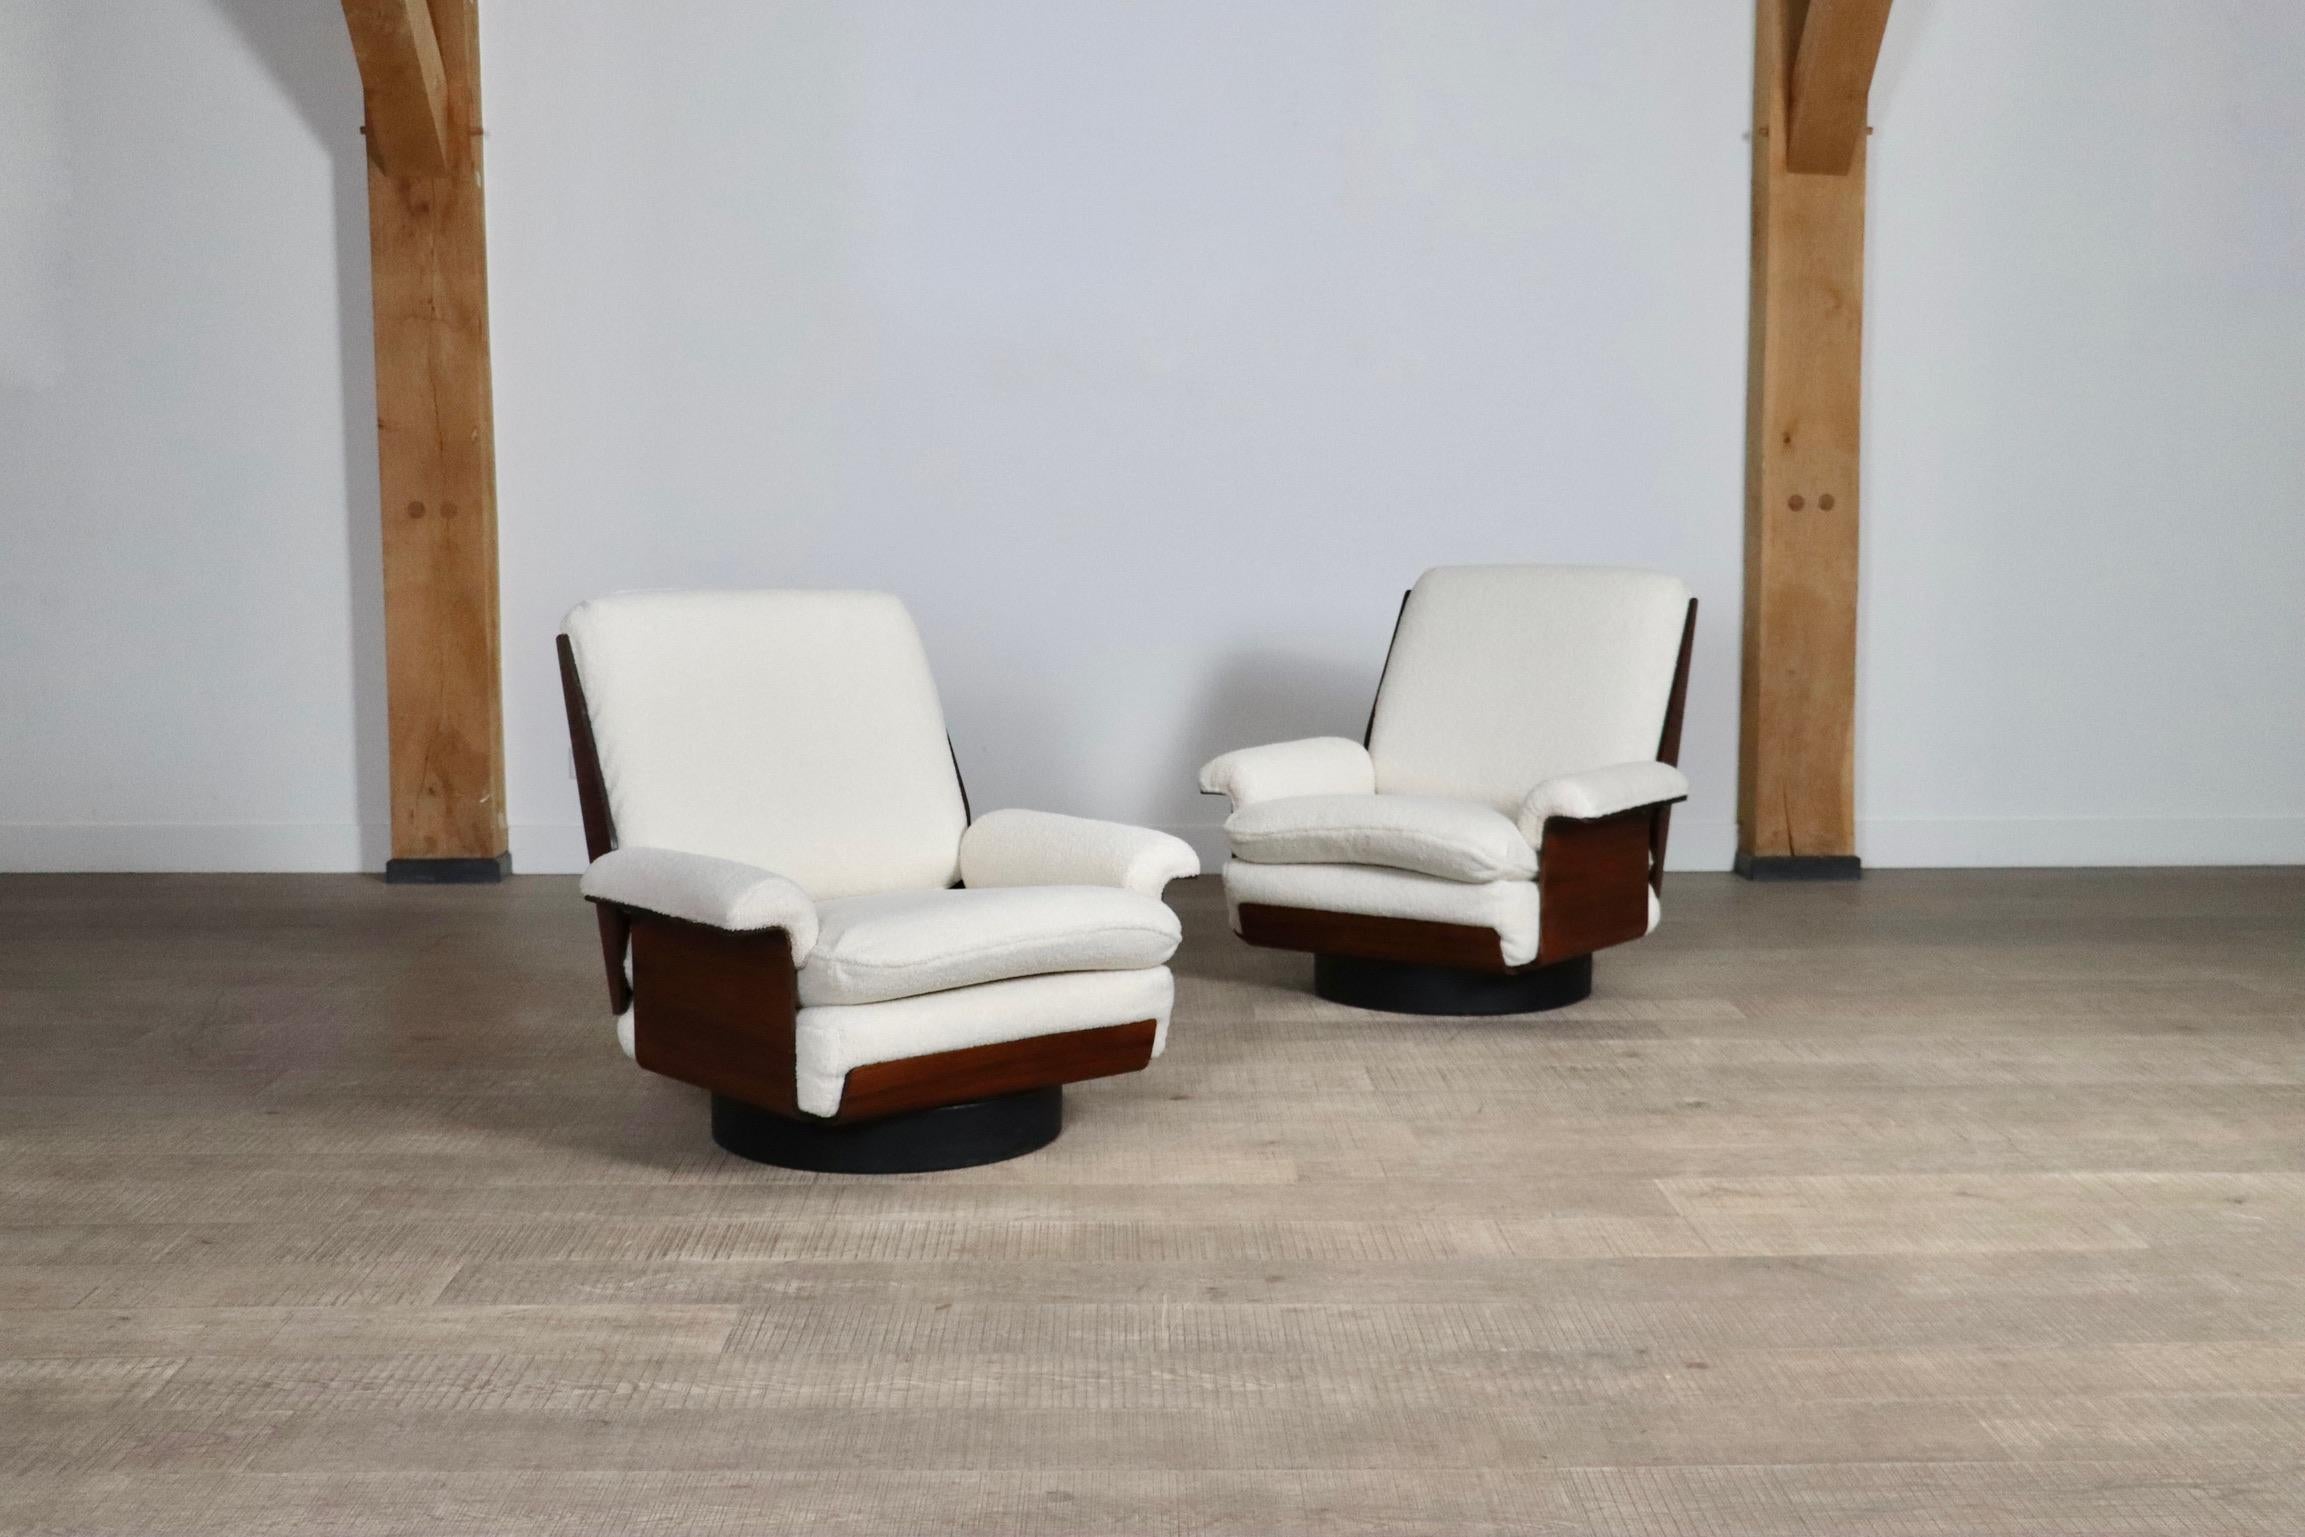 Nice set of two armchairs and a three seater sofa model Viborg by Bernard Brunier for Coulon, 1960s.
This elegant design is made of a plywood frame with stunning Rio Rosewood veneer which has been professionally refinished. The seating cushions are